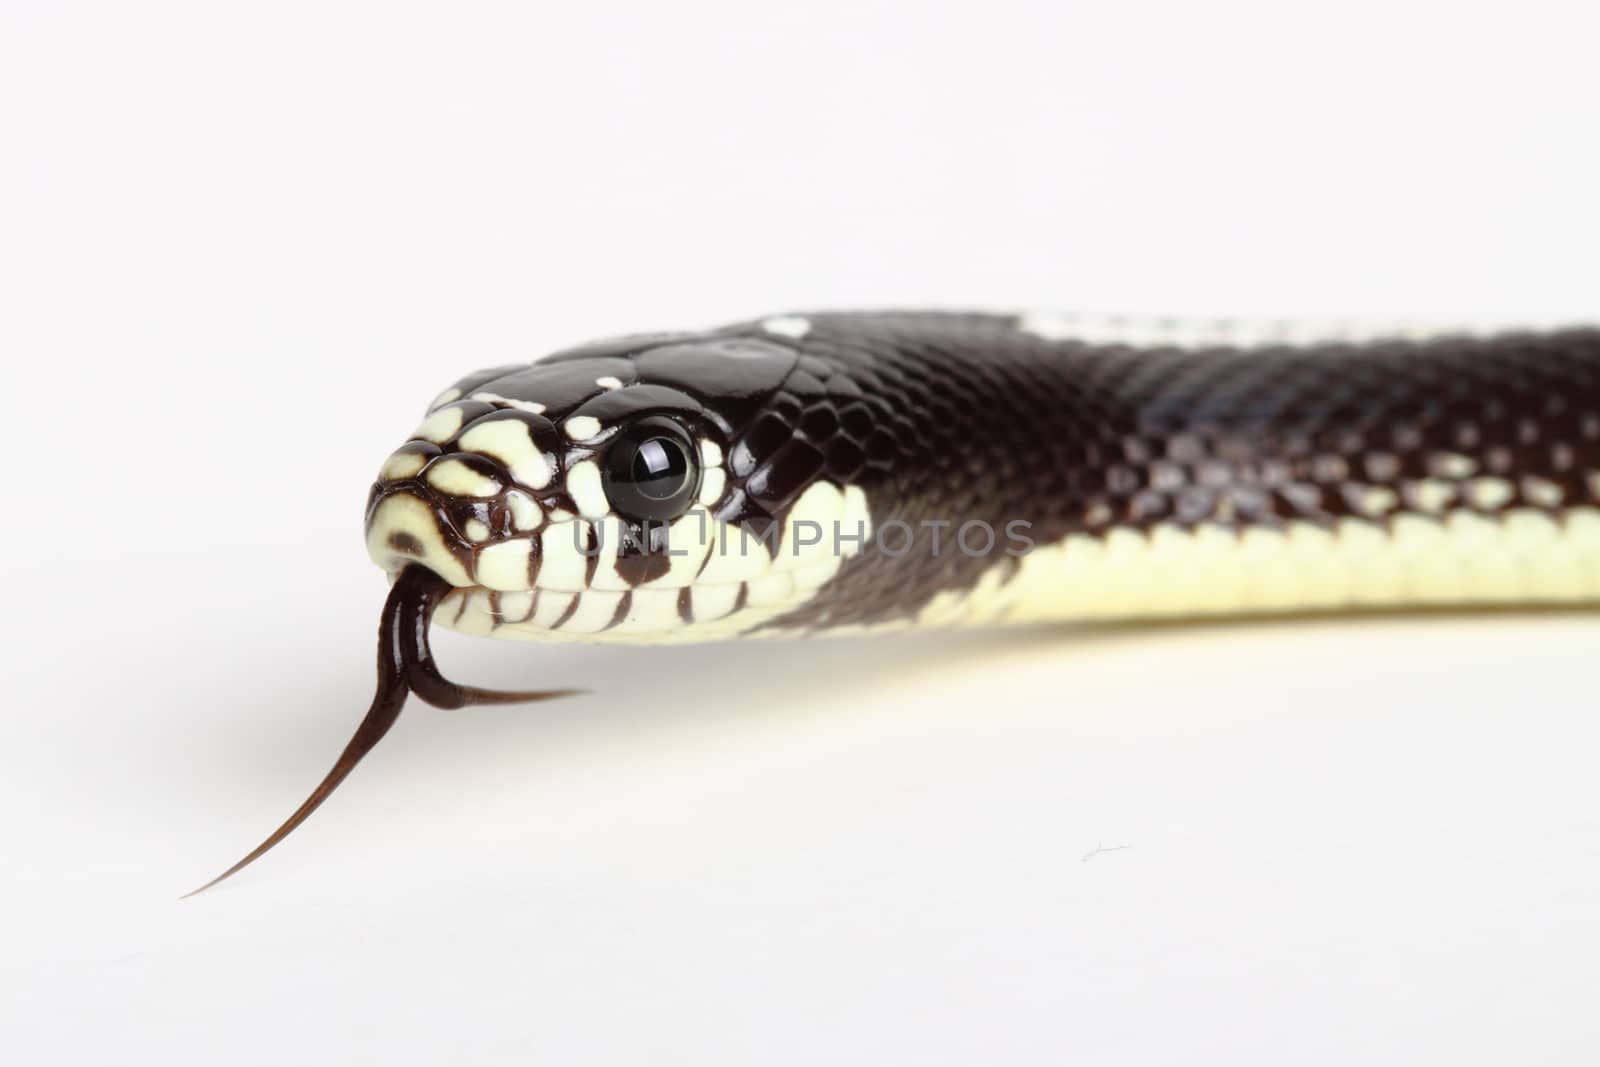 picture of a beautiful california desert snake